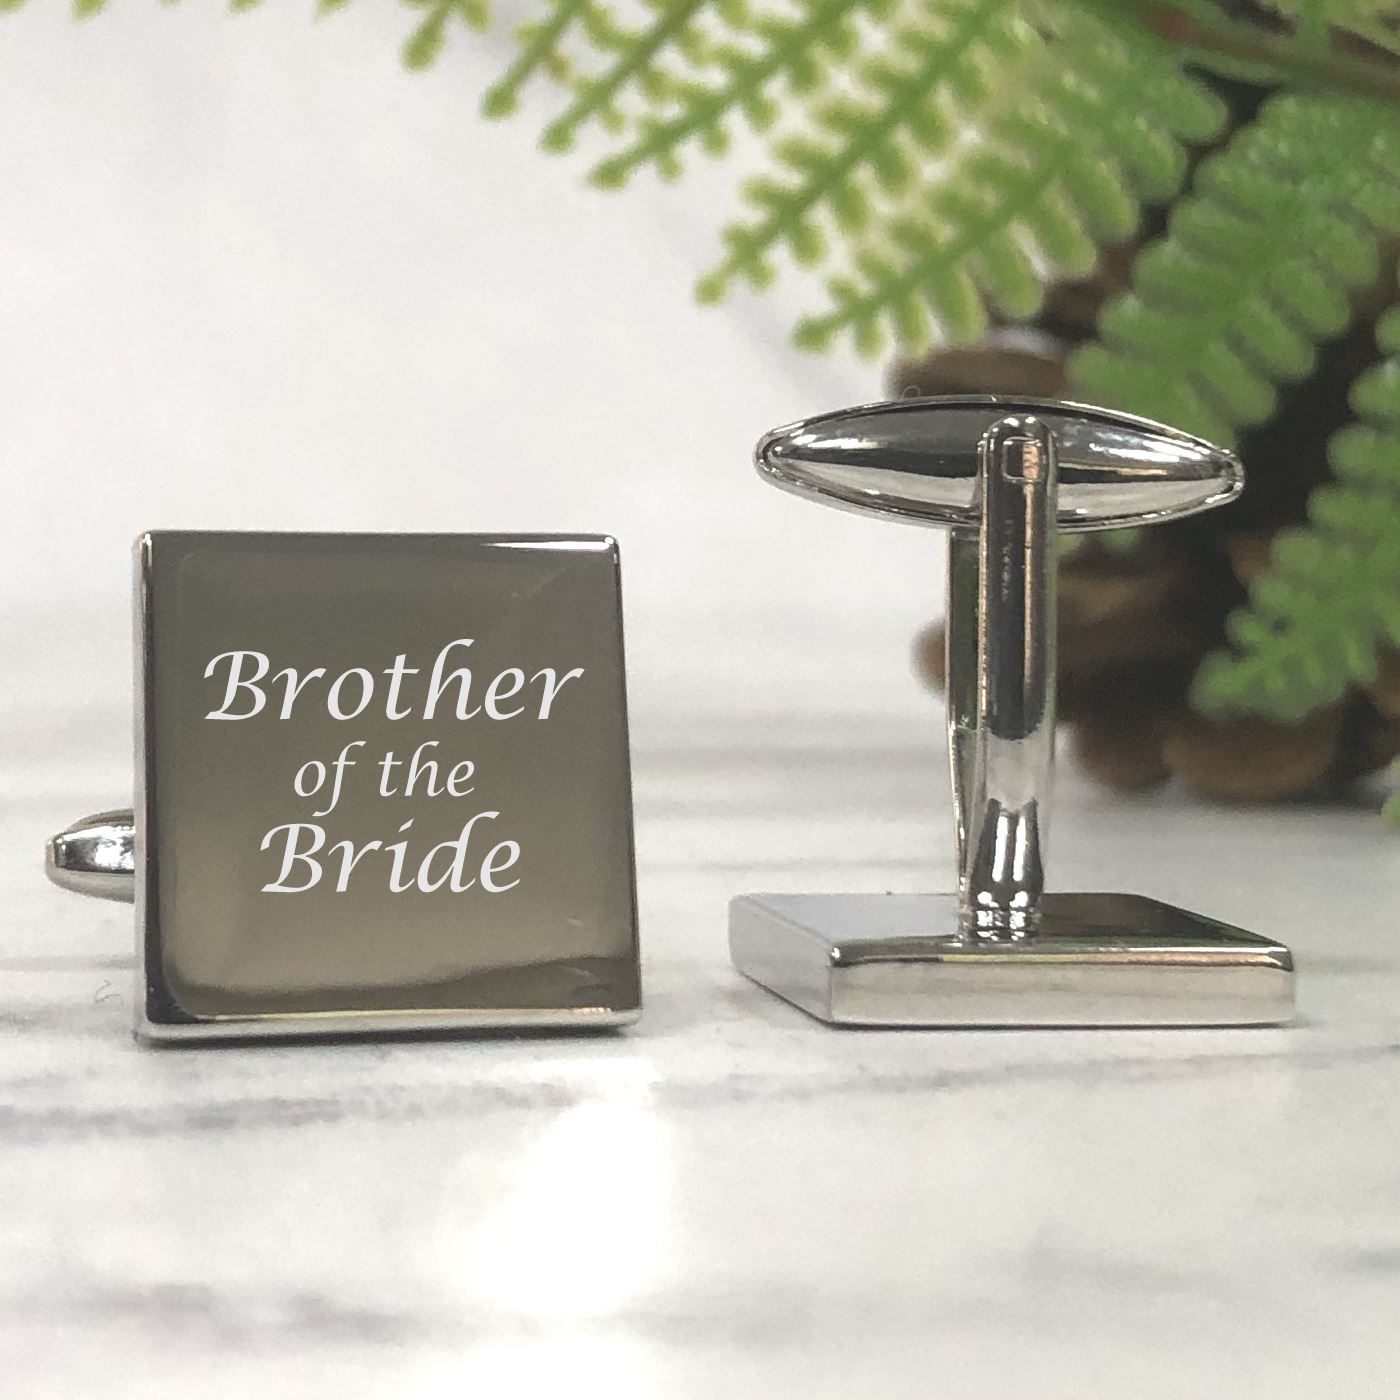 Engraved Wedding Day Square Cufflinks - Brother of the Bride